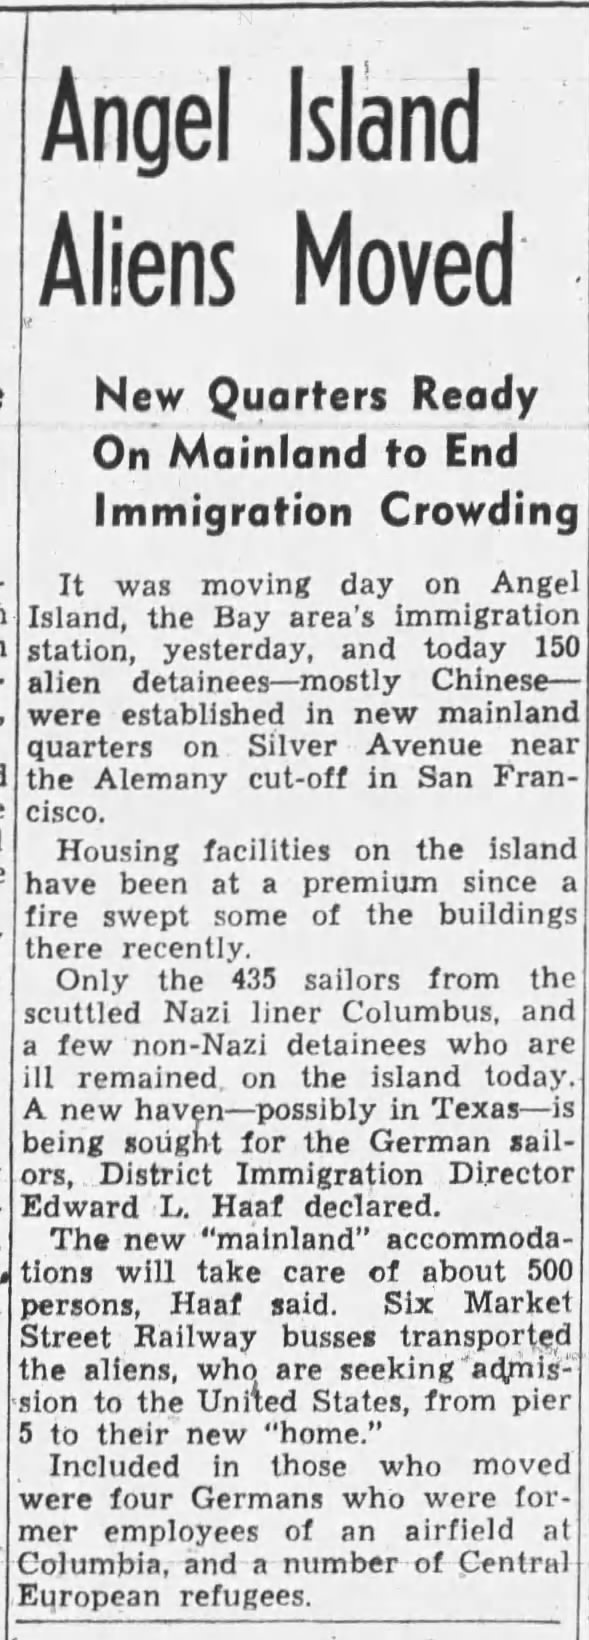 Detainees are moved from Angel Island to the mainland following fire in 1940